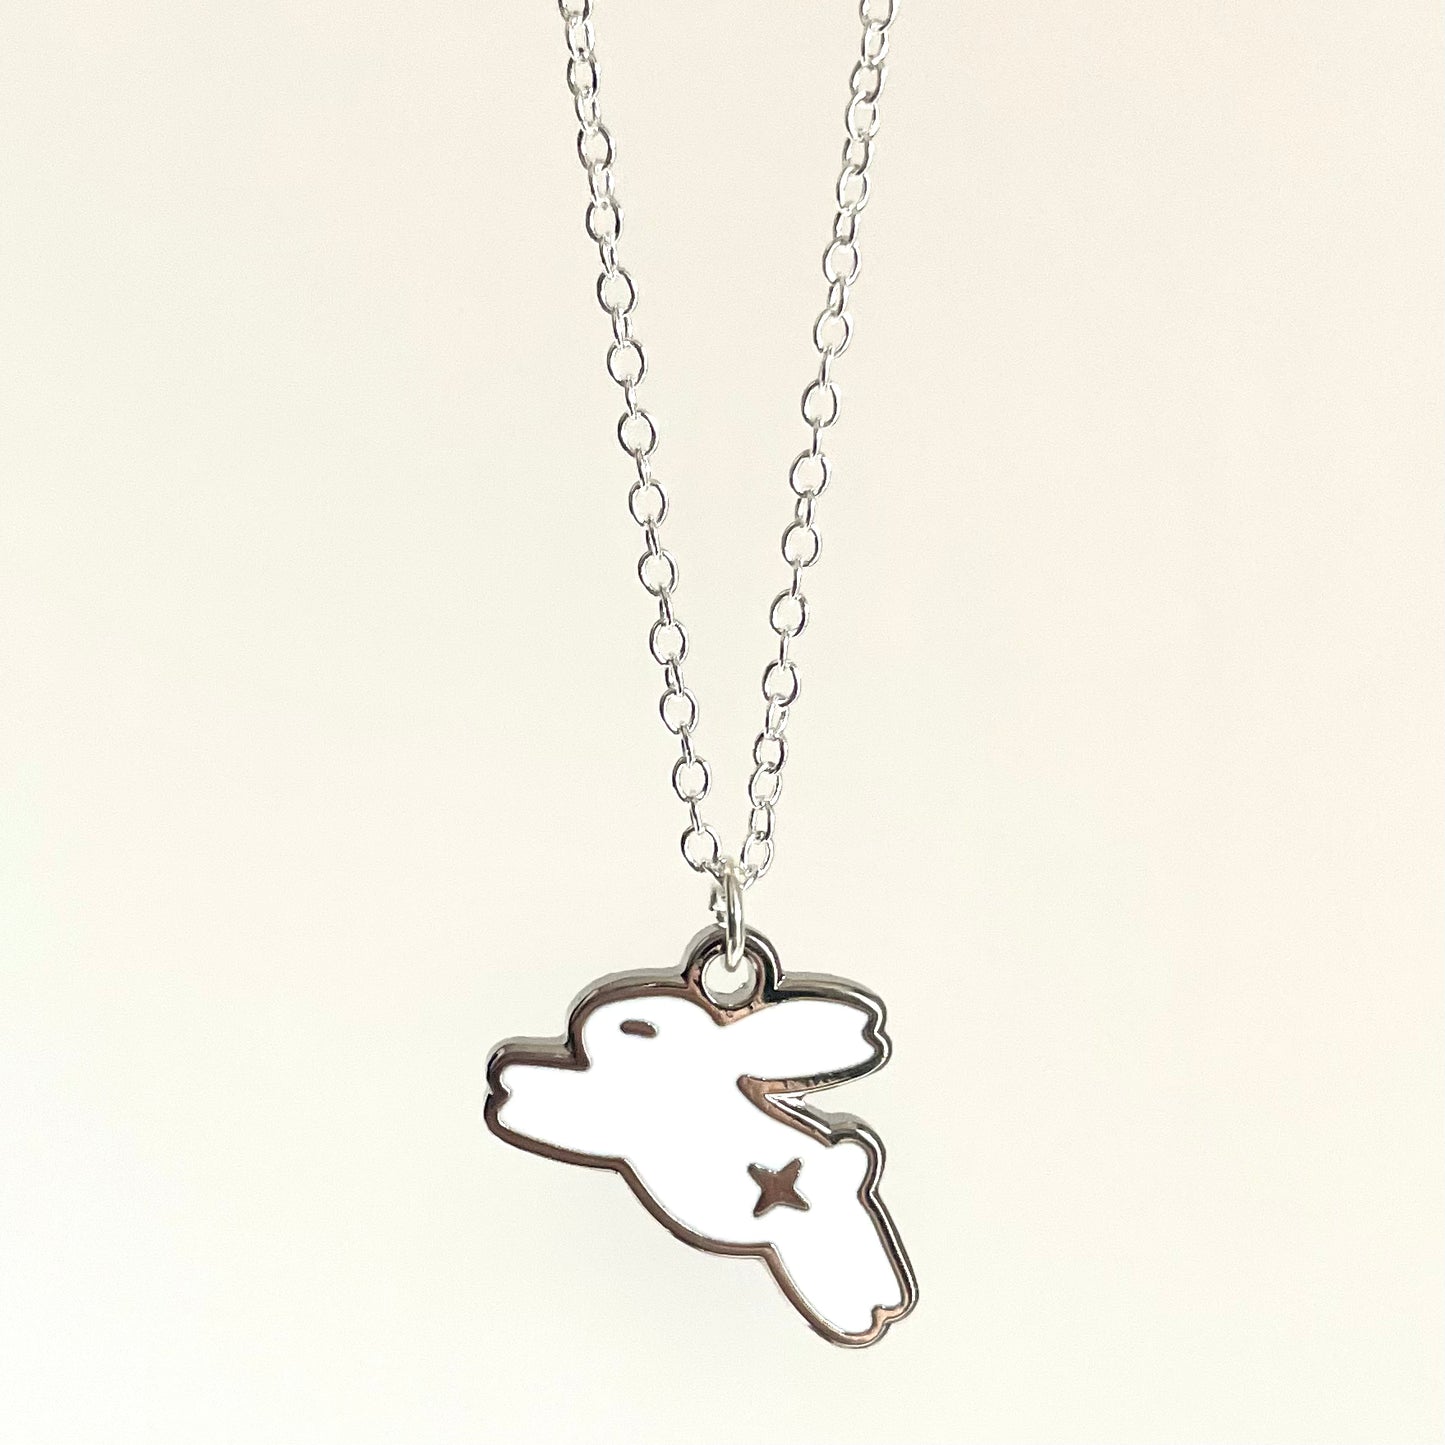 Star Bunny Necklace, Silver or Gold ✧･ﾟ: *